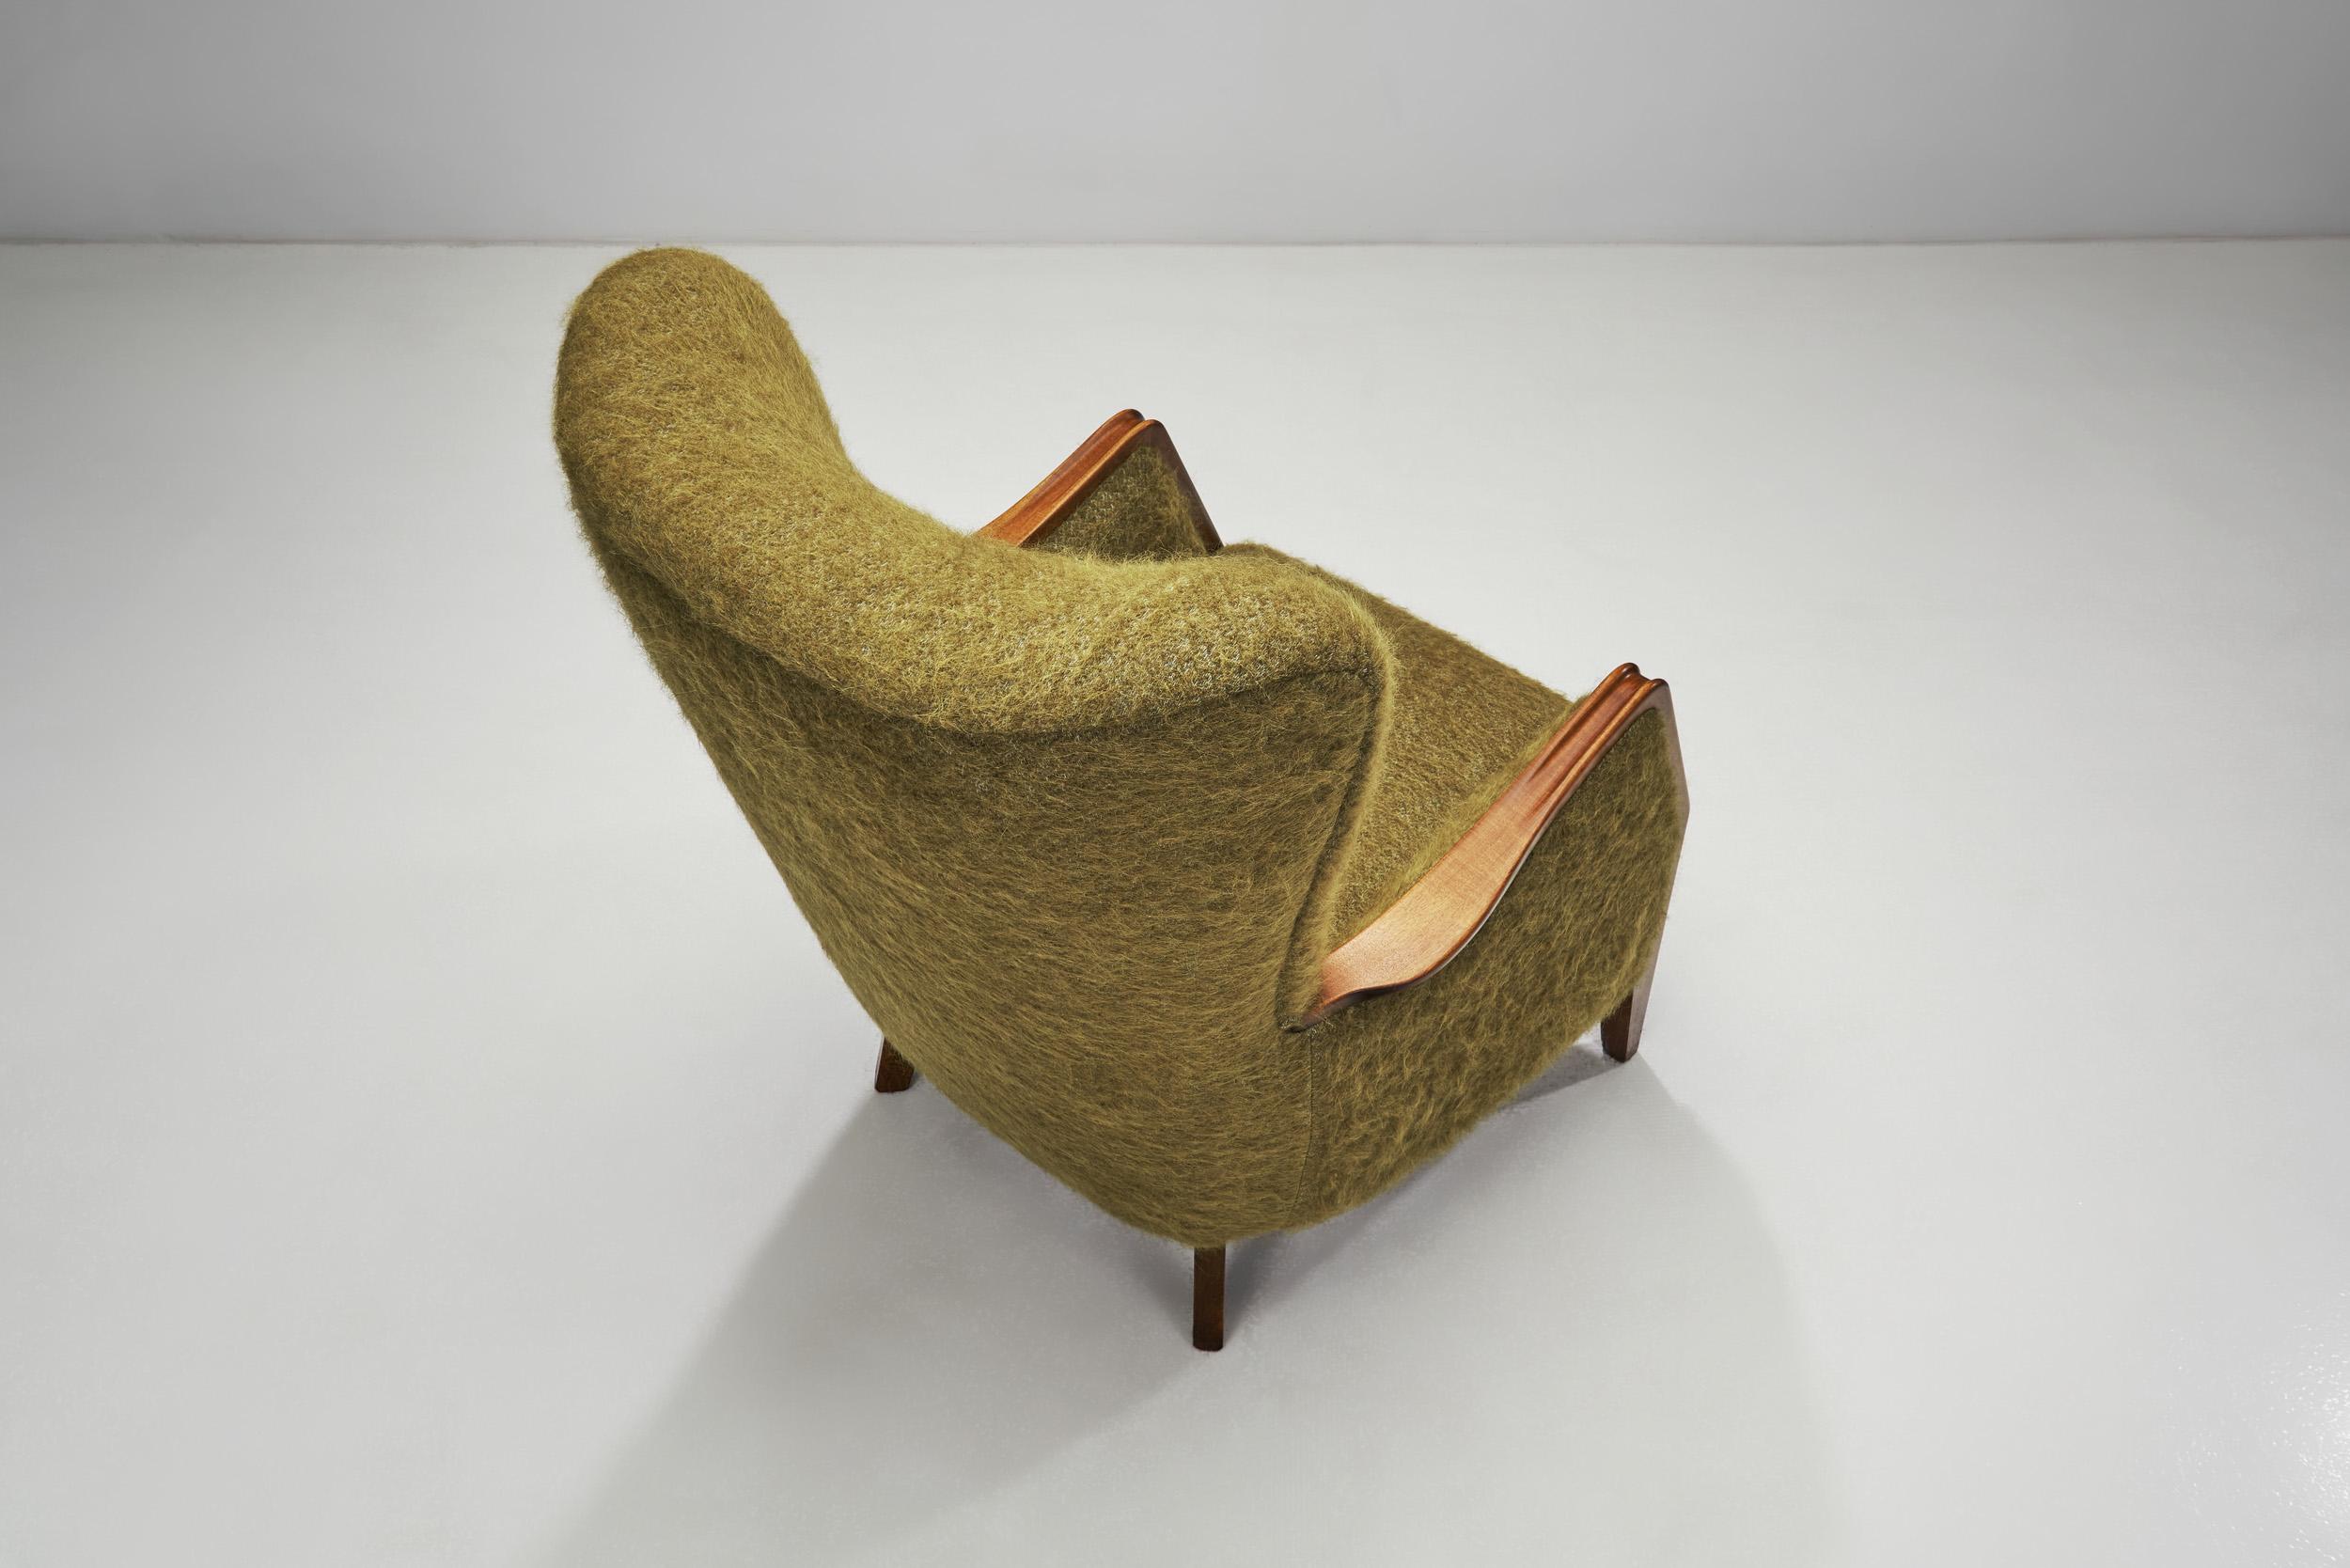 Danish Modern Armchair with Wooden Details, Denmark, 1950s For Sale 2